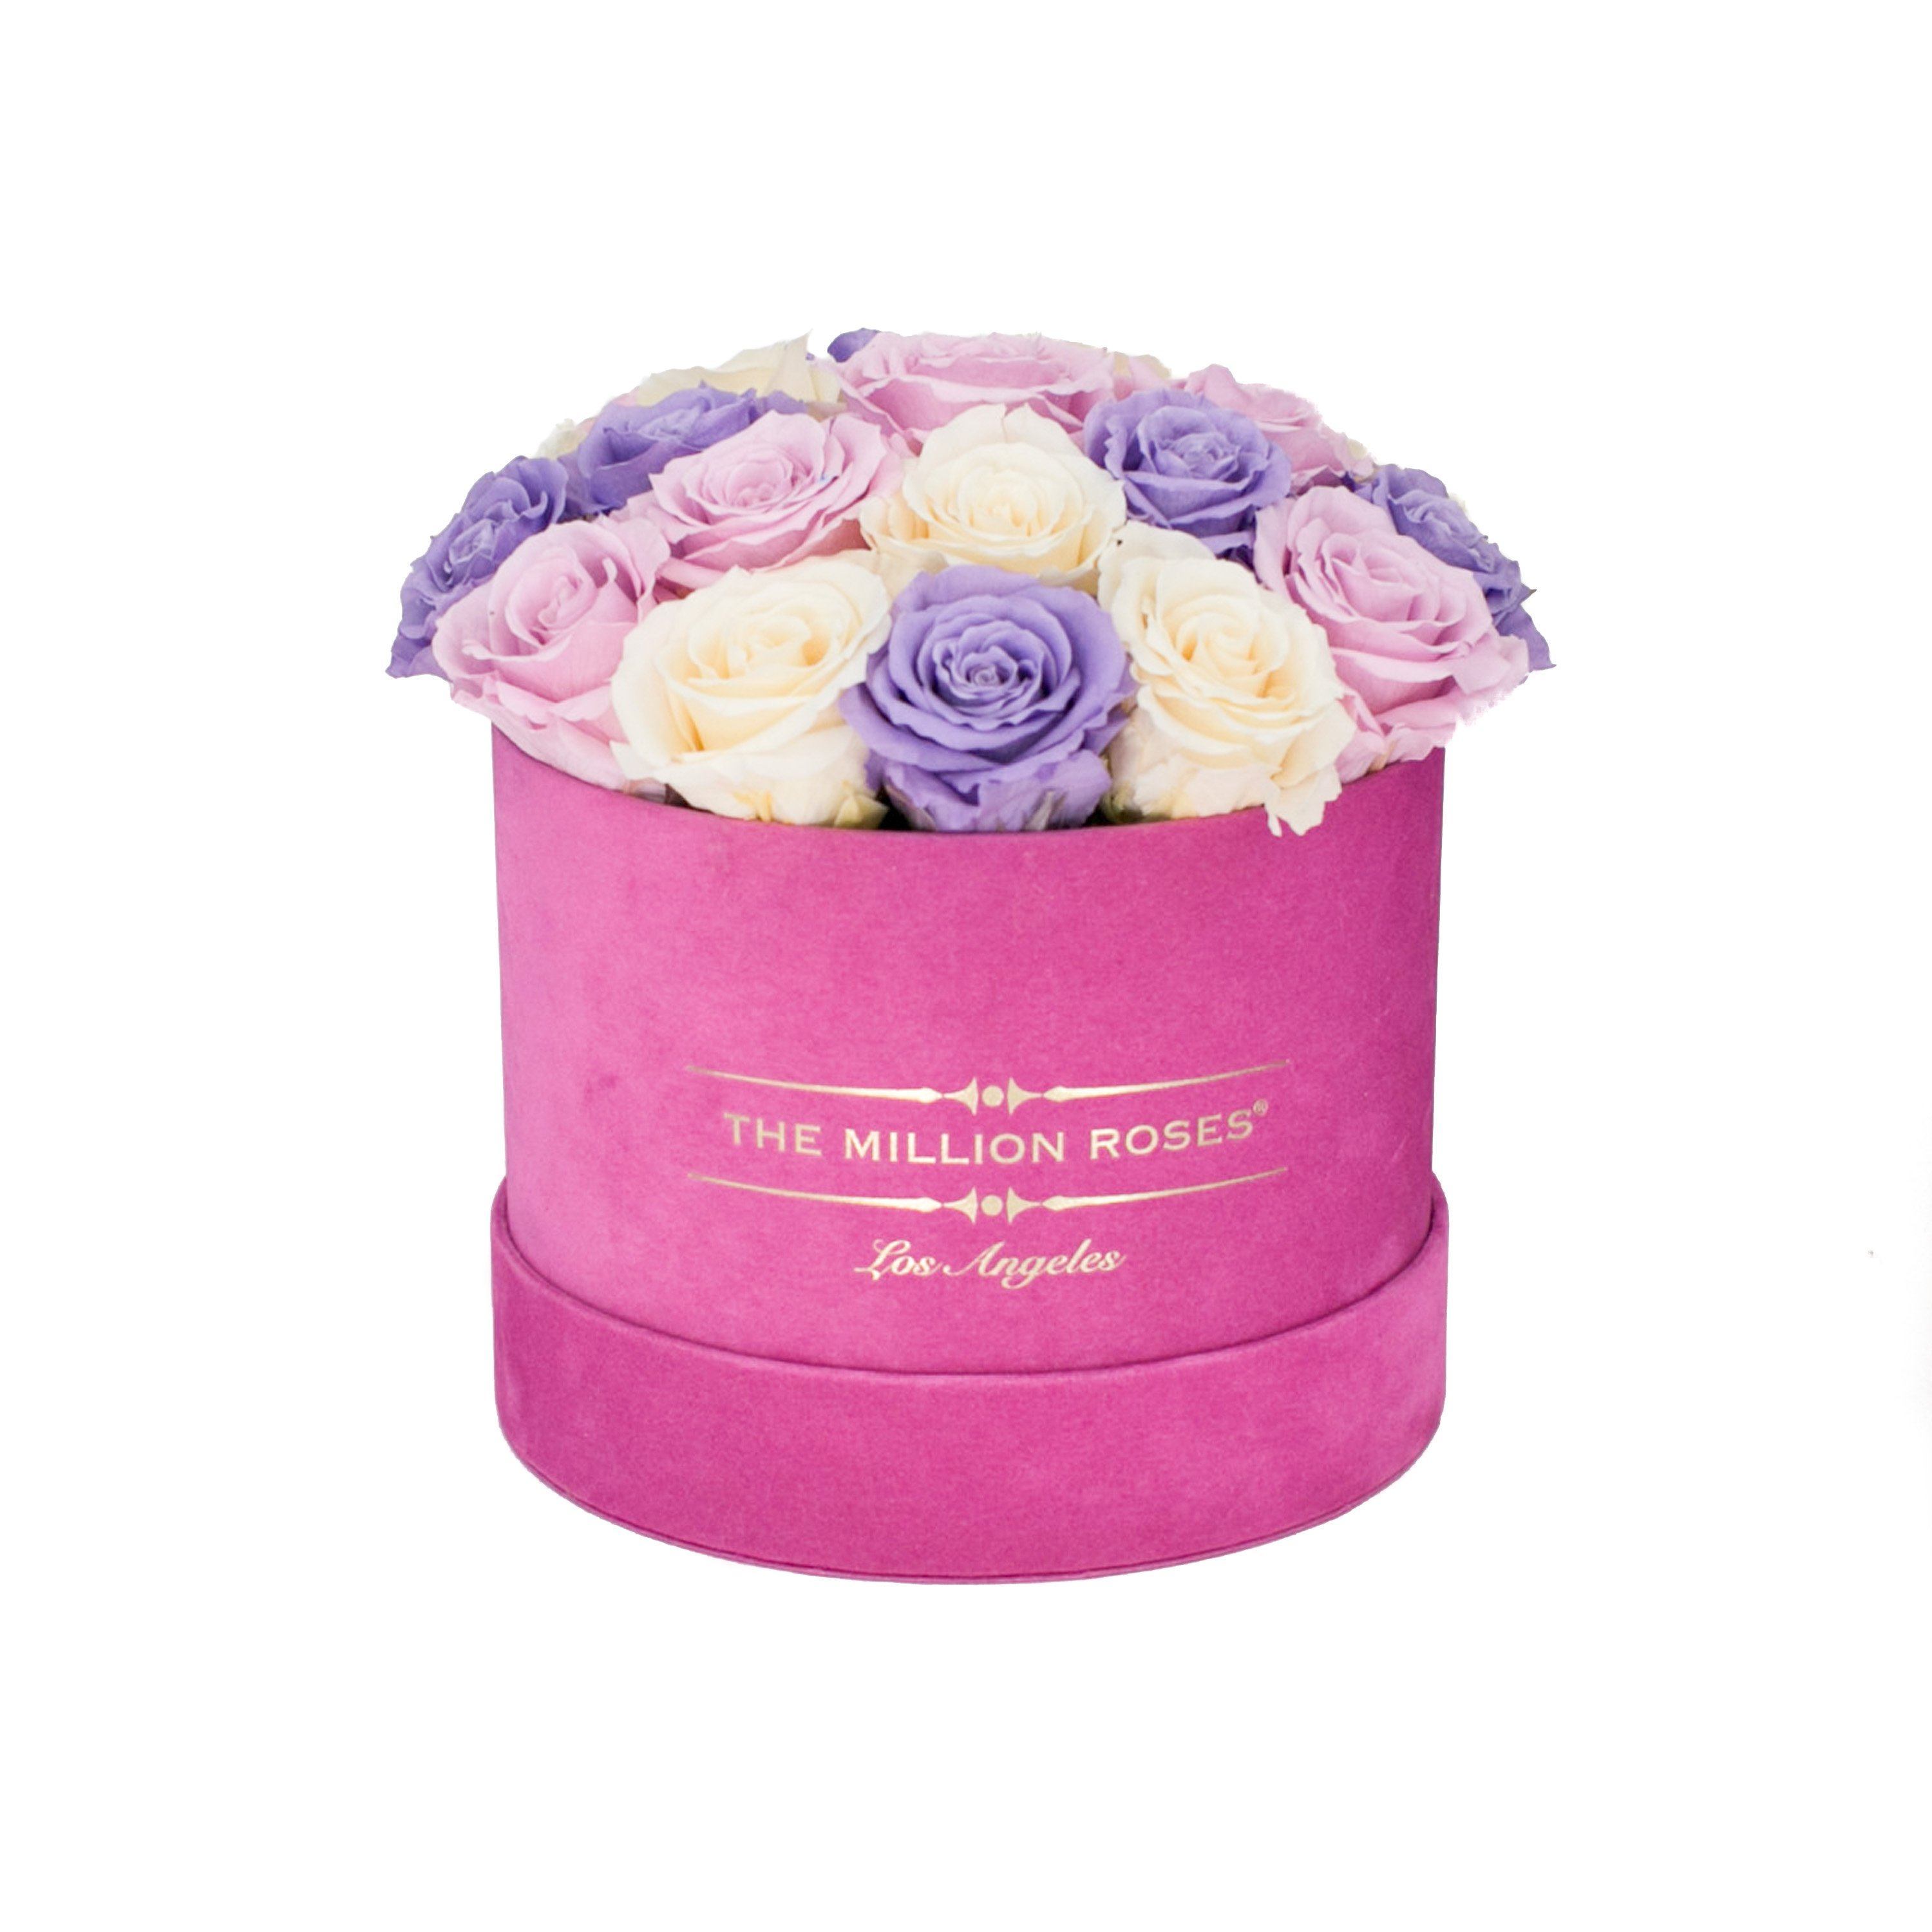 classic round box - hot-pink suede box - violet/ivory/pink roses violet eternity roses - the million roses